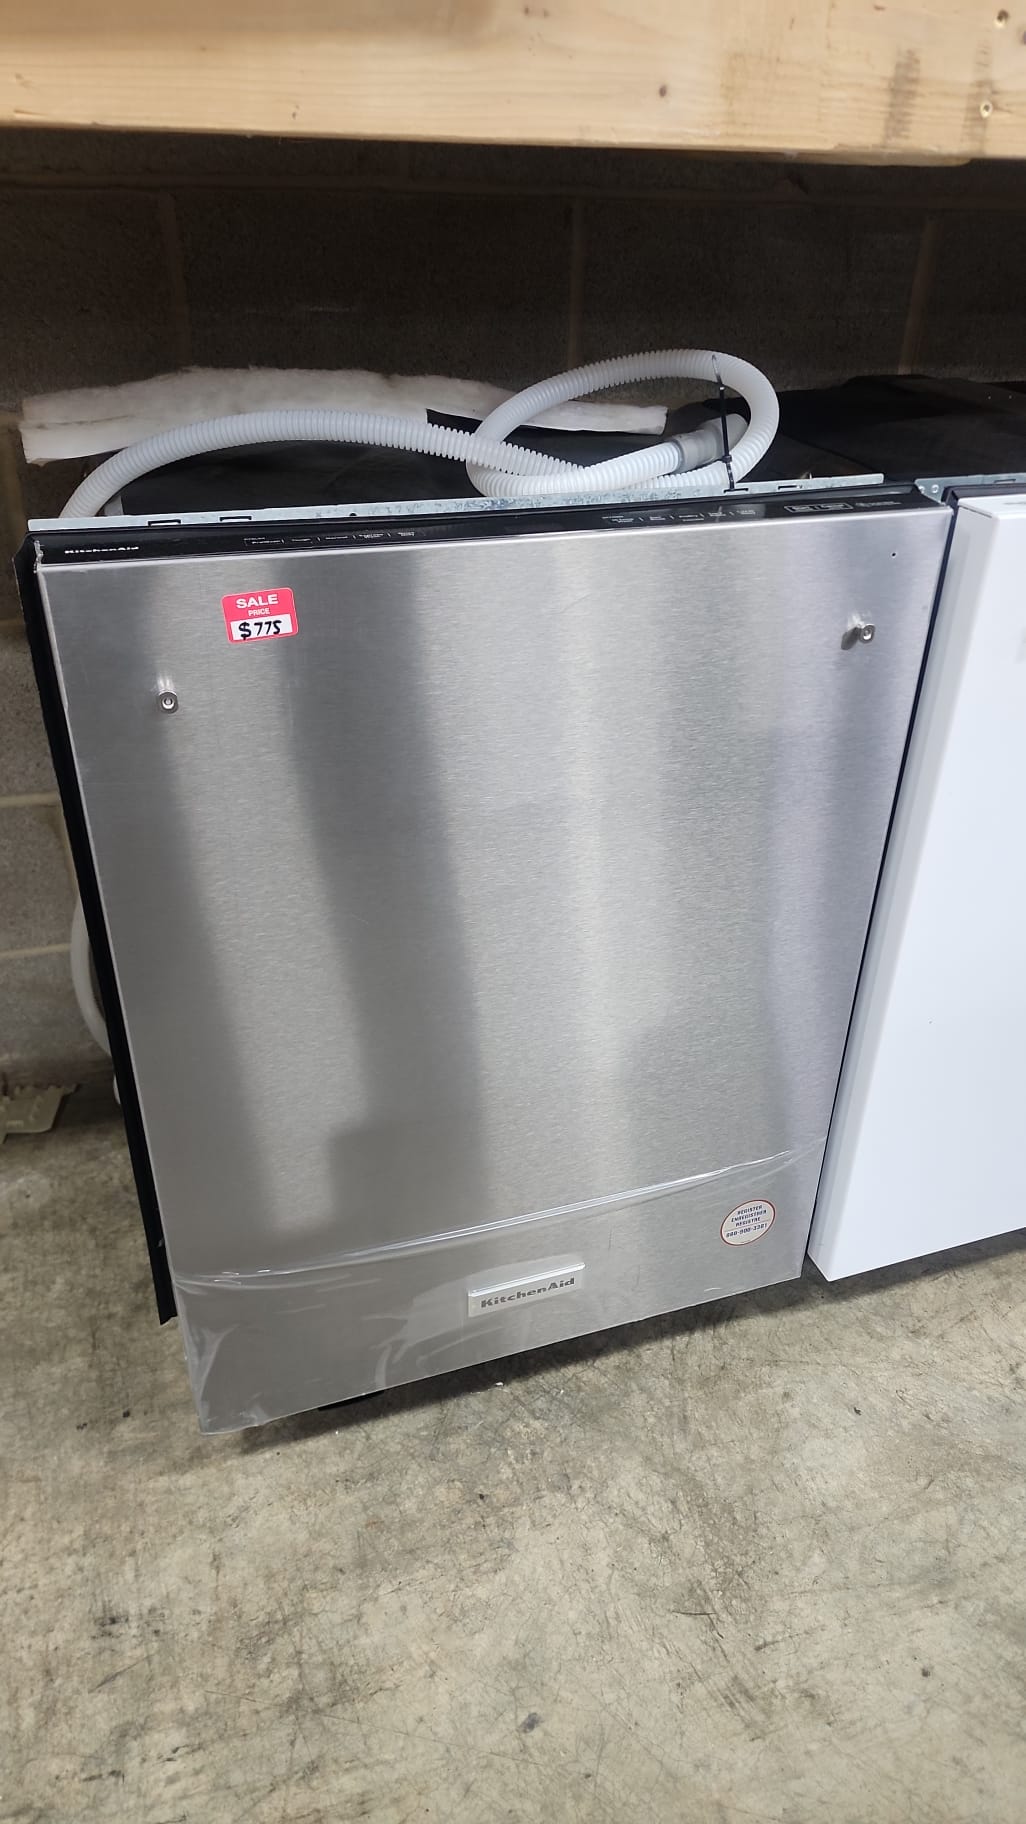 KitchenAid – New Top Control Built-In Dishwasher with Stainless Steel